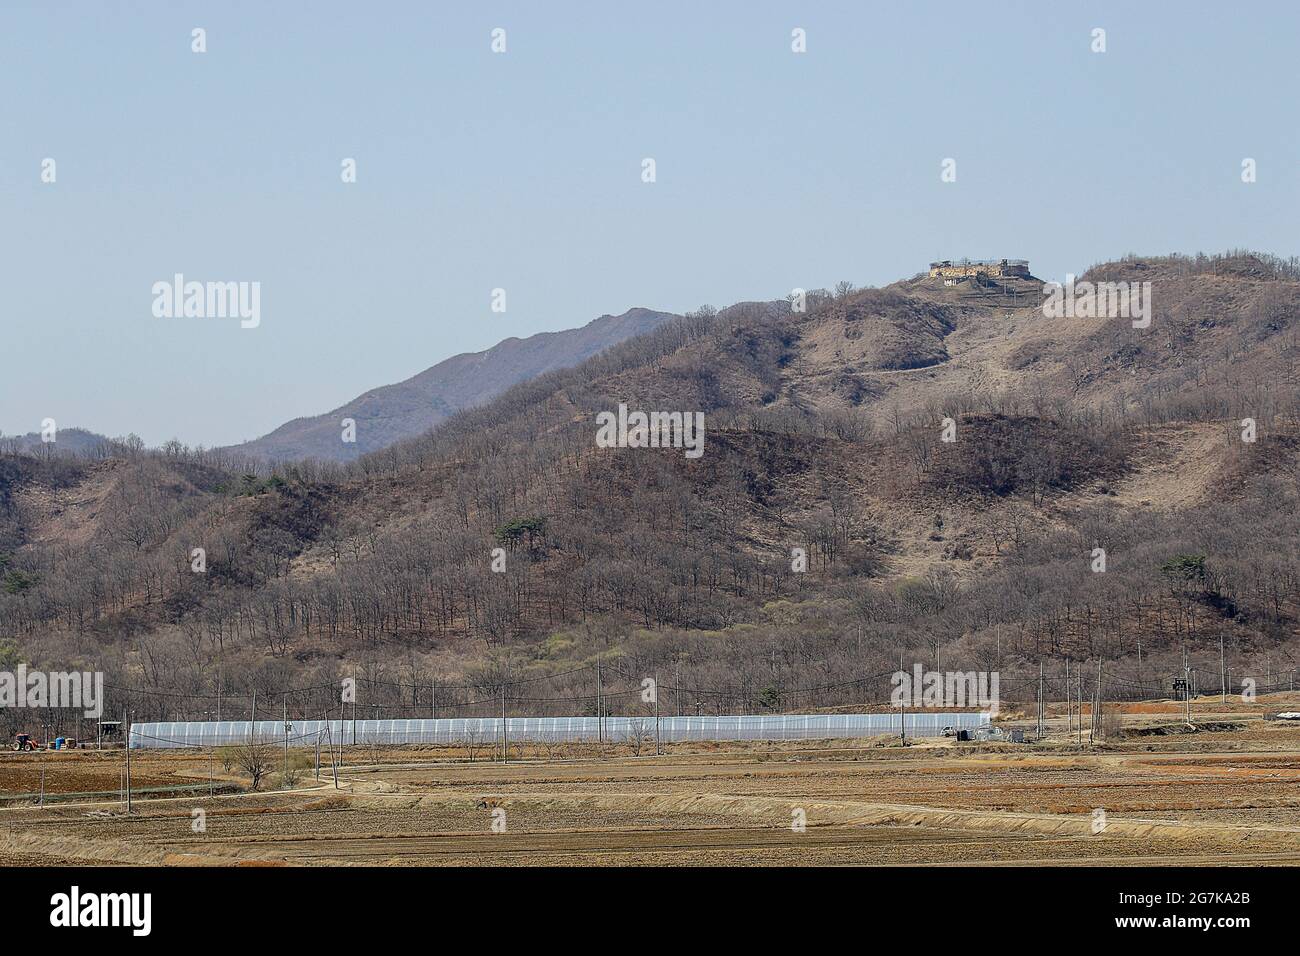 April 11, 2018-Goyang, South Korea-A View of Korean War battle of white horse and the Civilian Control Line in Cheorwon, South Korea. The Battle of White Horse was another in a series of bloody battles for dominant hilltop positions during the Korean War. Baengma-goji was a 395-metre (1,296 ft) hill in the Iron Triangle, formed by Pyonggang at its peak and Gimhwa-eup and Cheorwon at its base, was a strategic transportation route in the central region of the Korean peninsula. White Horse was the crest of a forested hill mass that extended in a northwest-to-southeast direction for about two mile Stock Photo